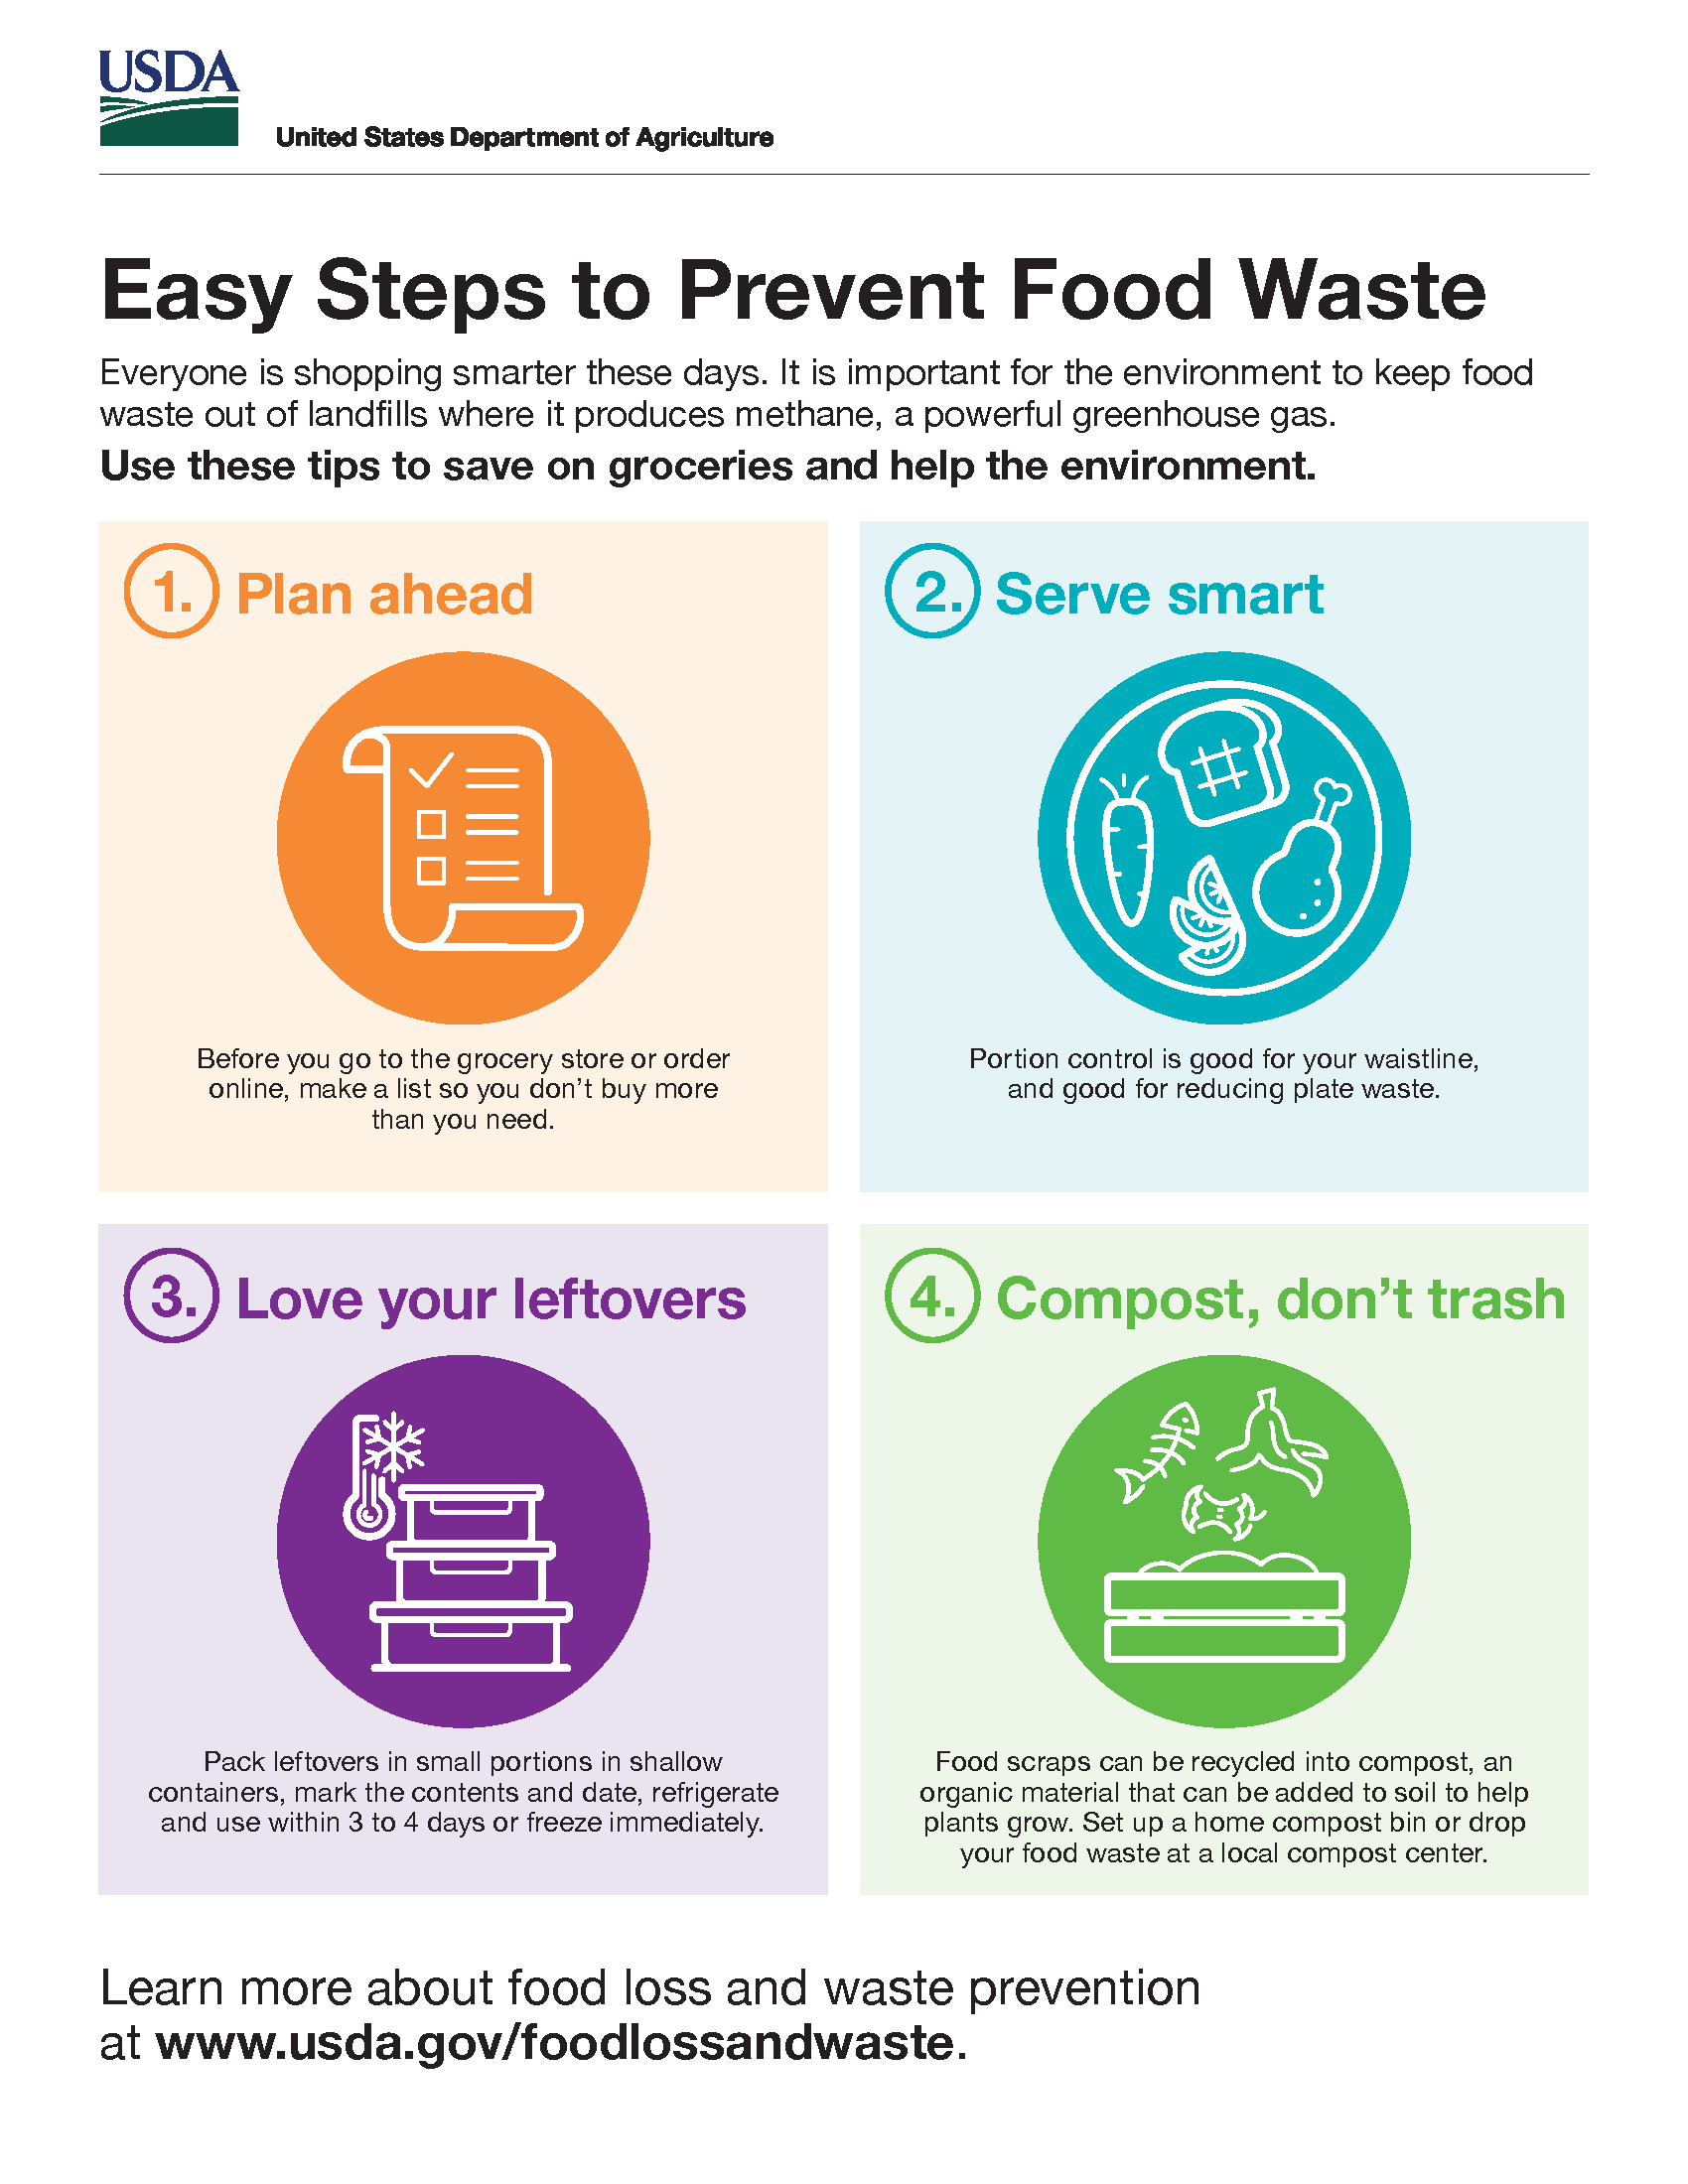 Smart Waste Reduction Challenge: Reduce Waste & Recycle